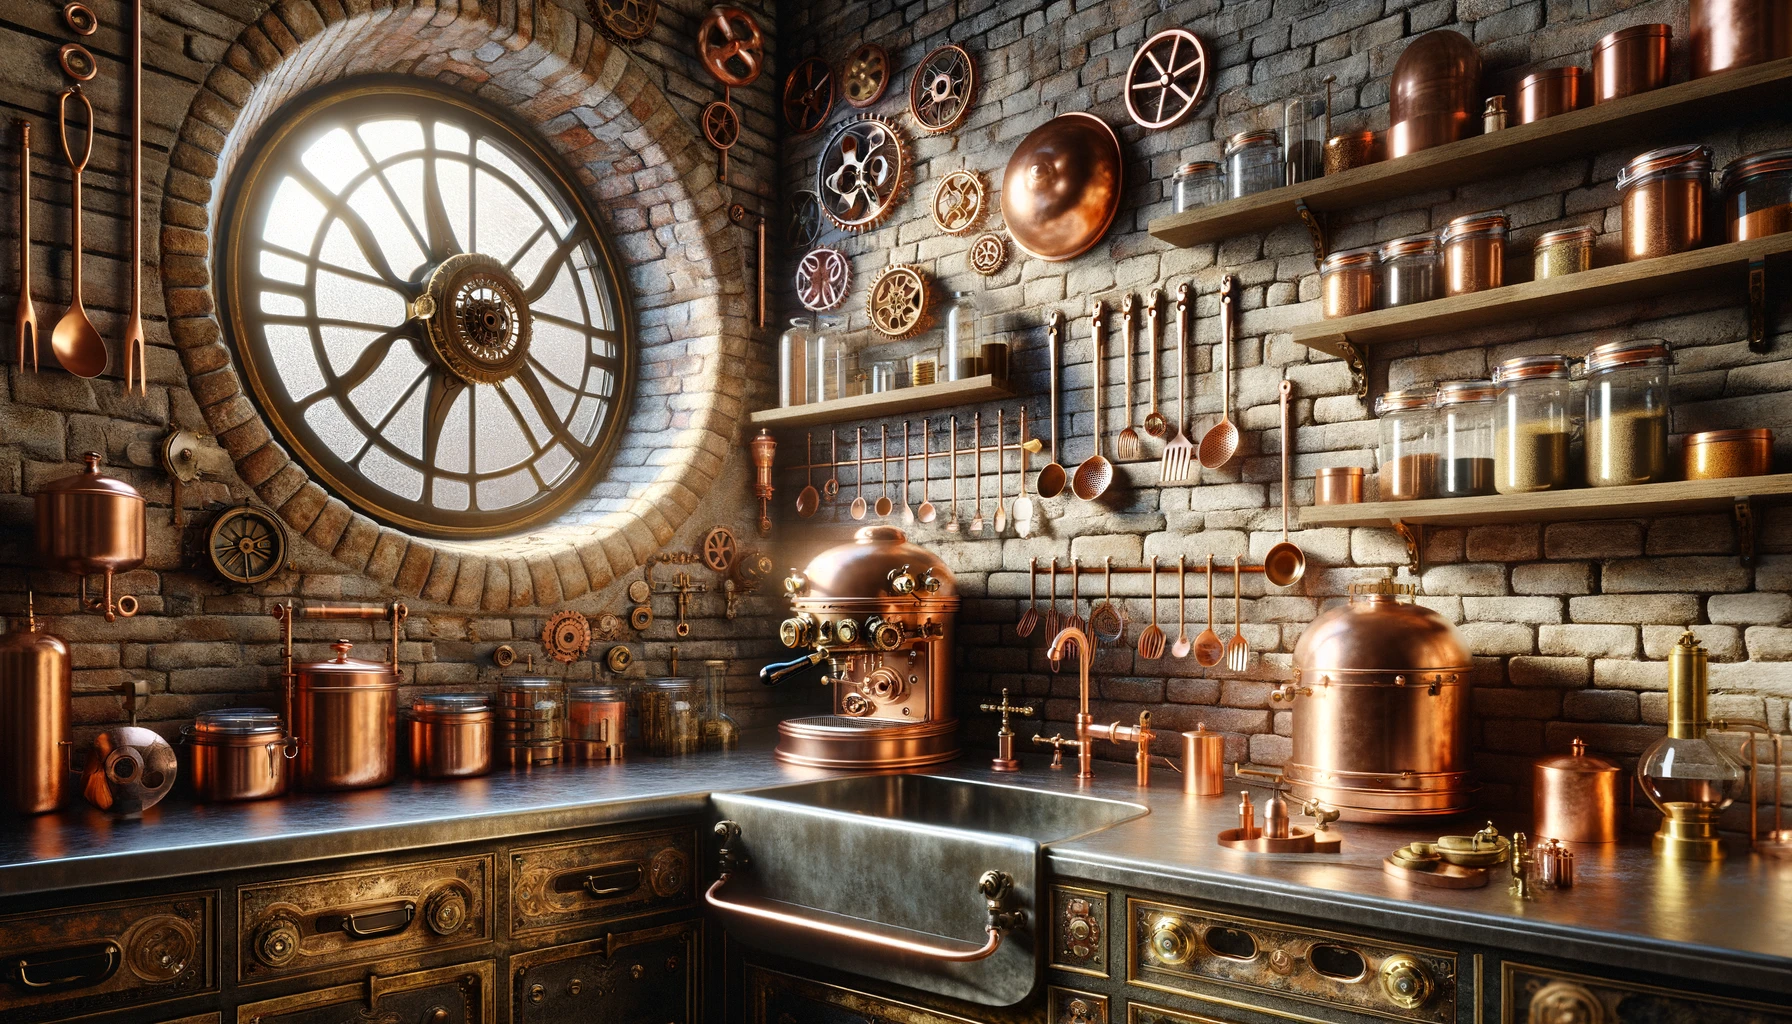 Steampunk-themed kitchen with copper utensils and round window.